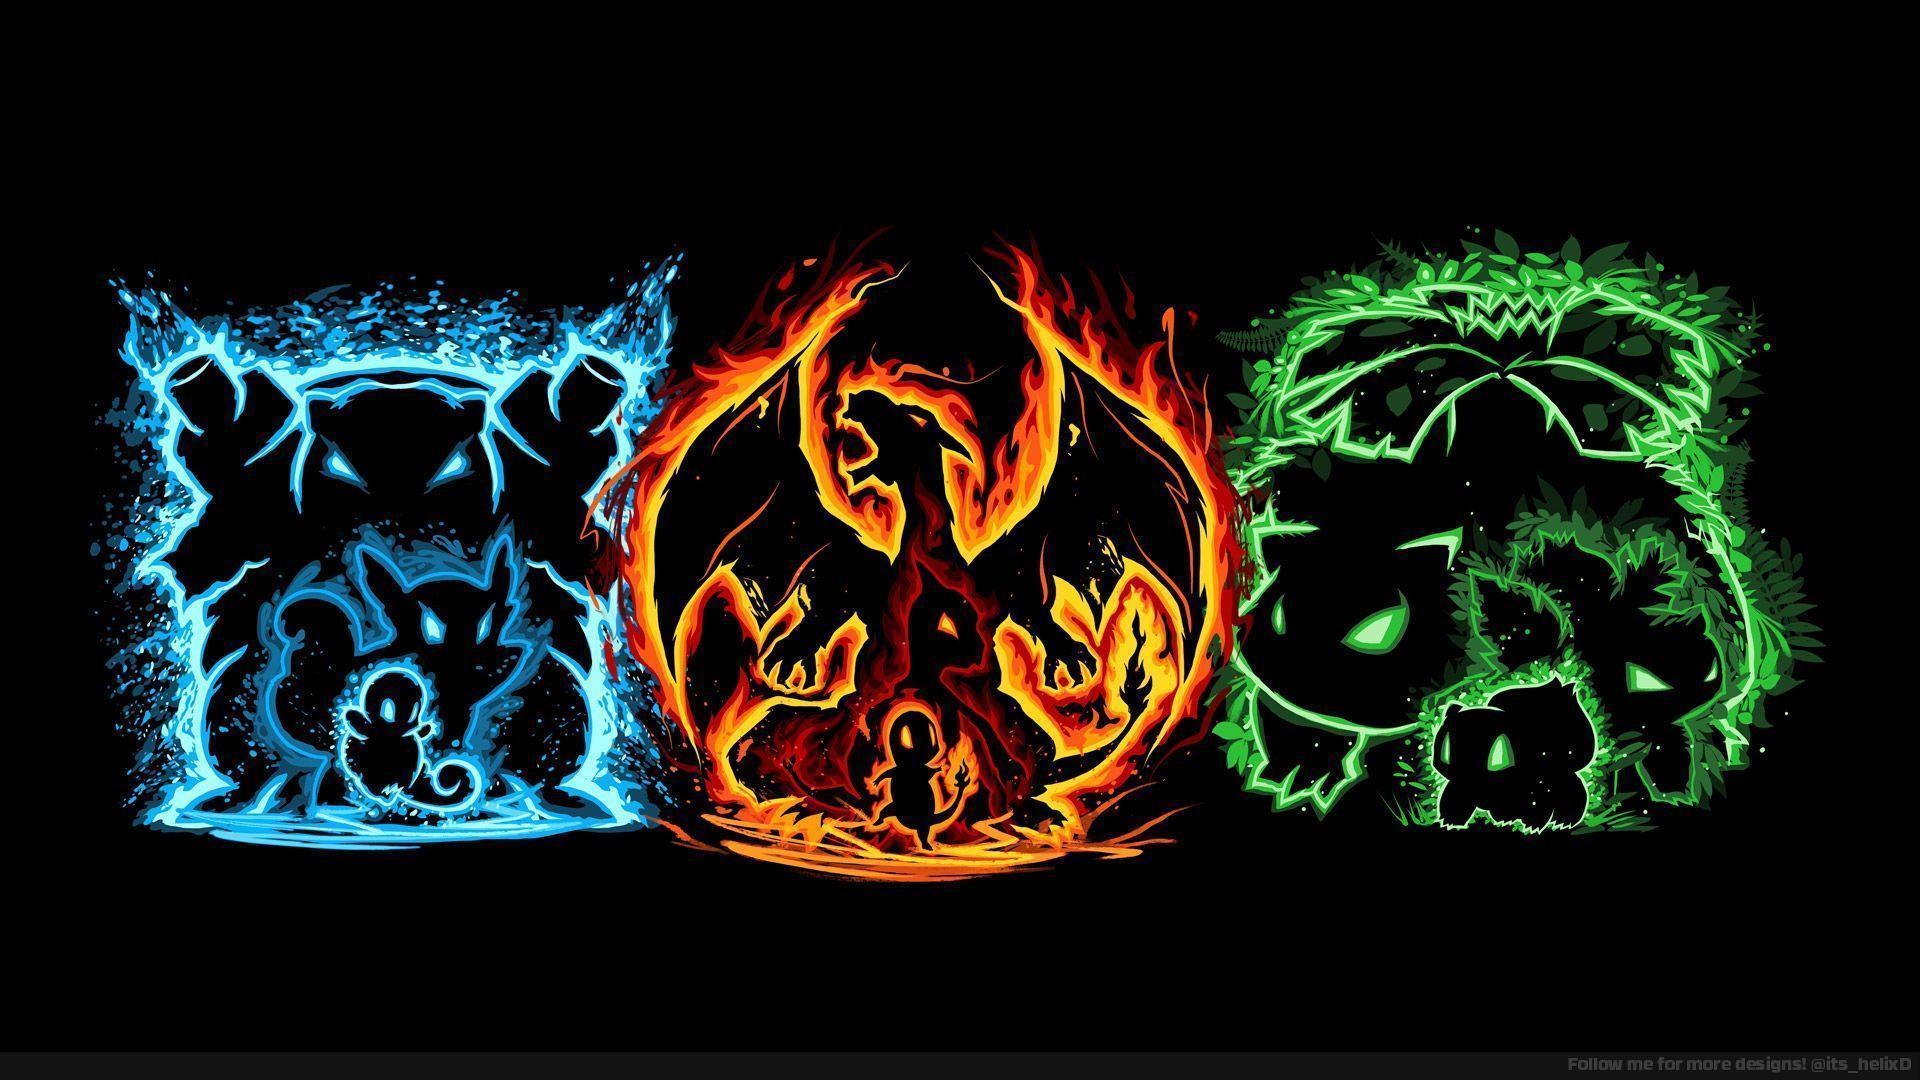 Evolution of Fire, Water, and Grass (1080p Wallpaper). Thanks